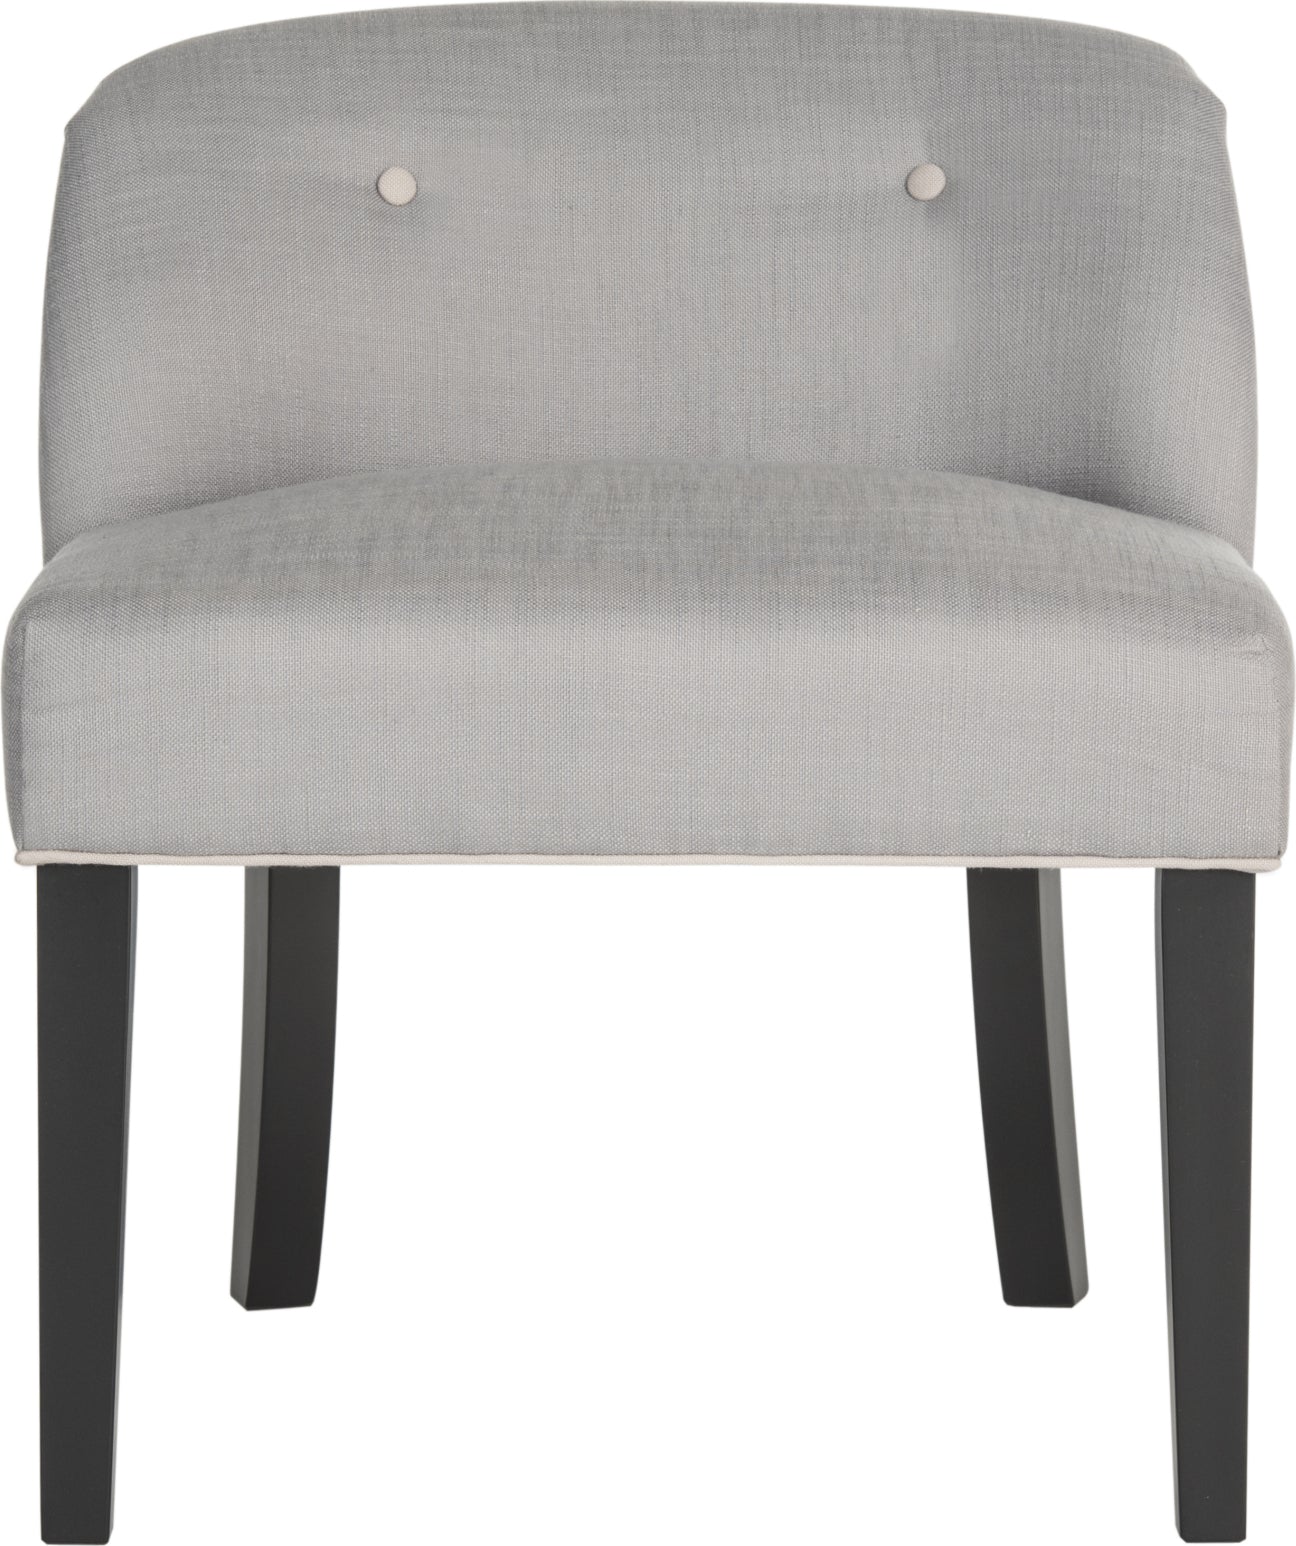 Safavieh Bell Vanity Chair Grey and Taupe Black Furniture main image